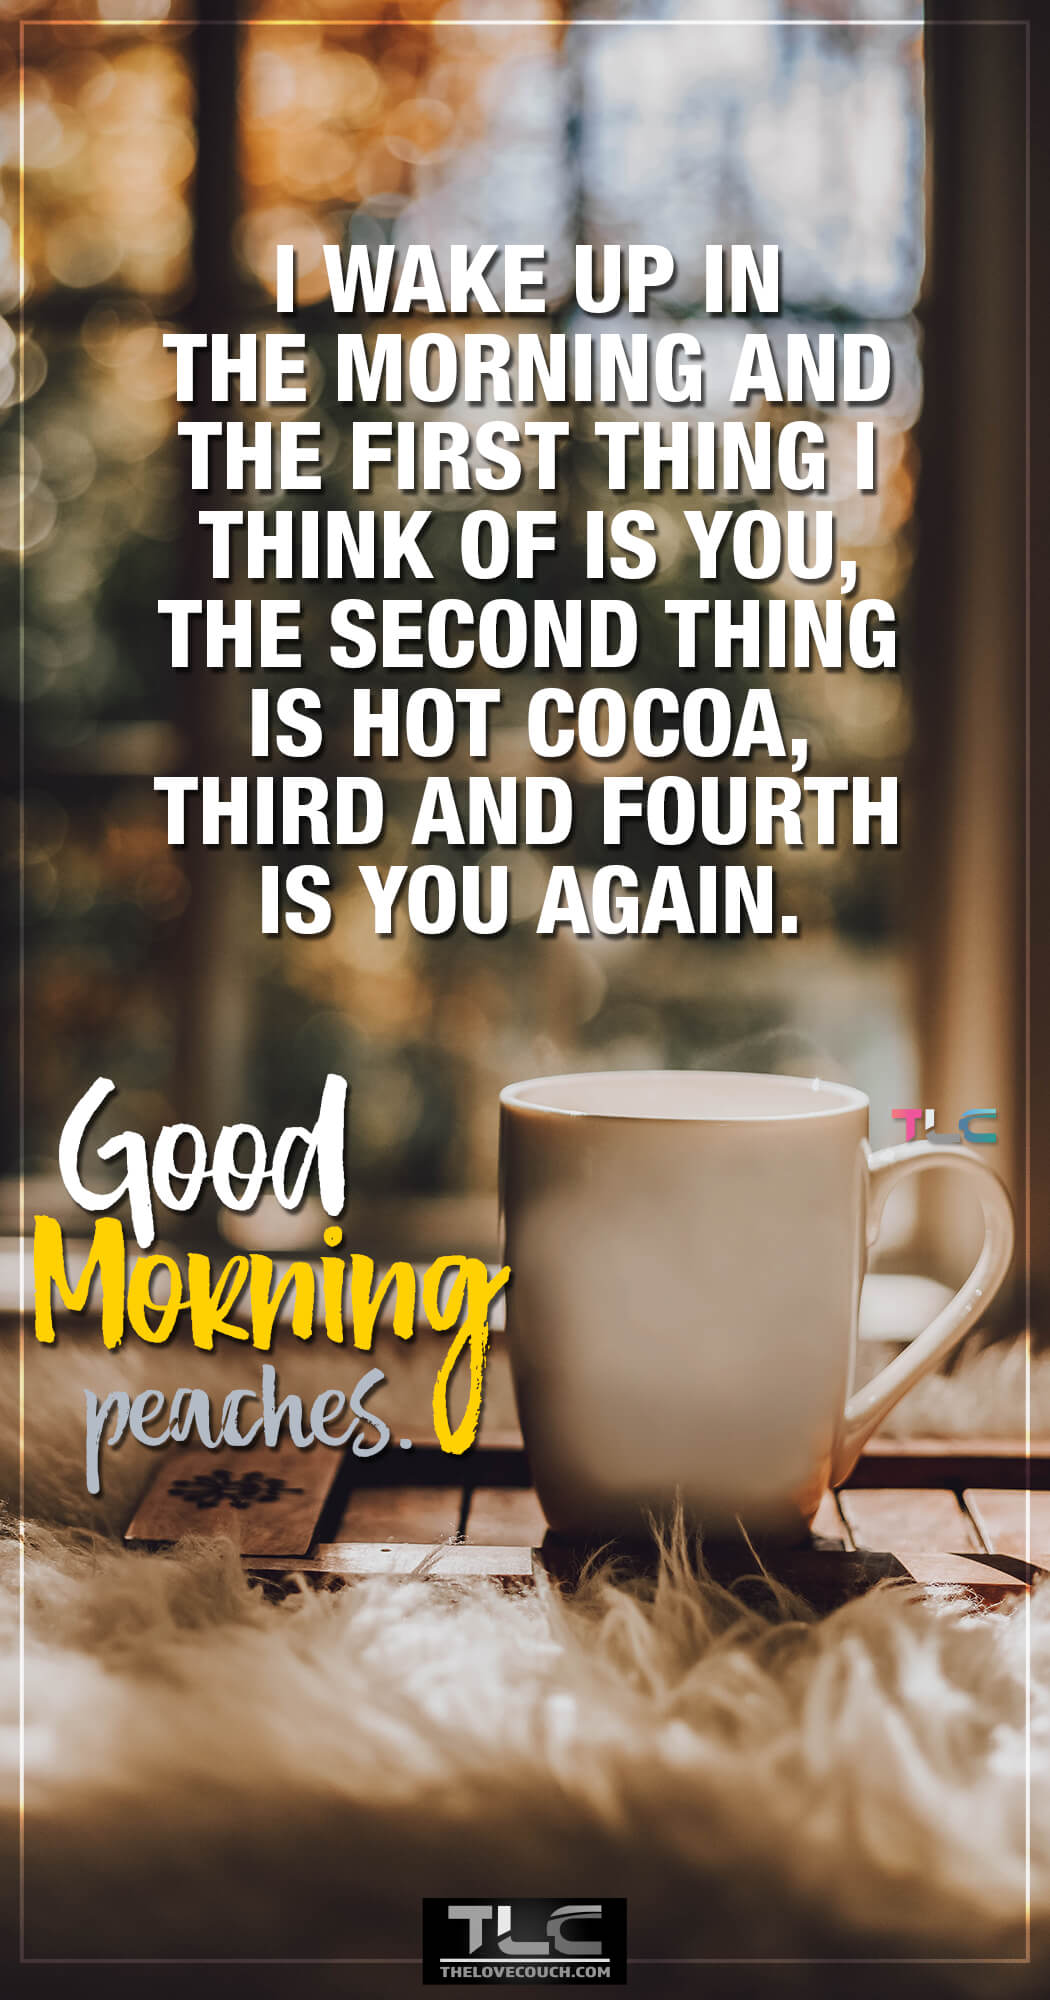 I wake up in the morning and the first thing I think of is you, the second thing is hot cocoa, third and fourth is you again. Good morning peaches.